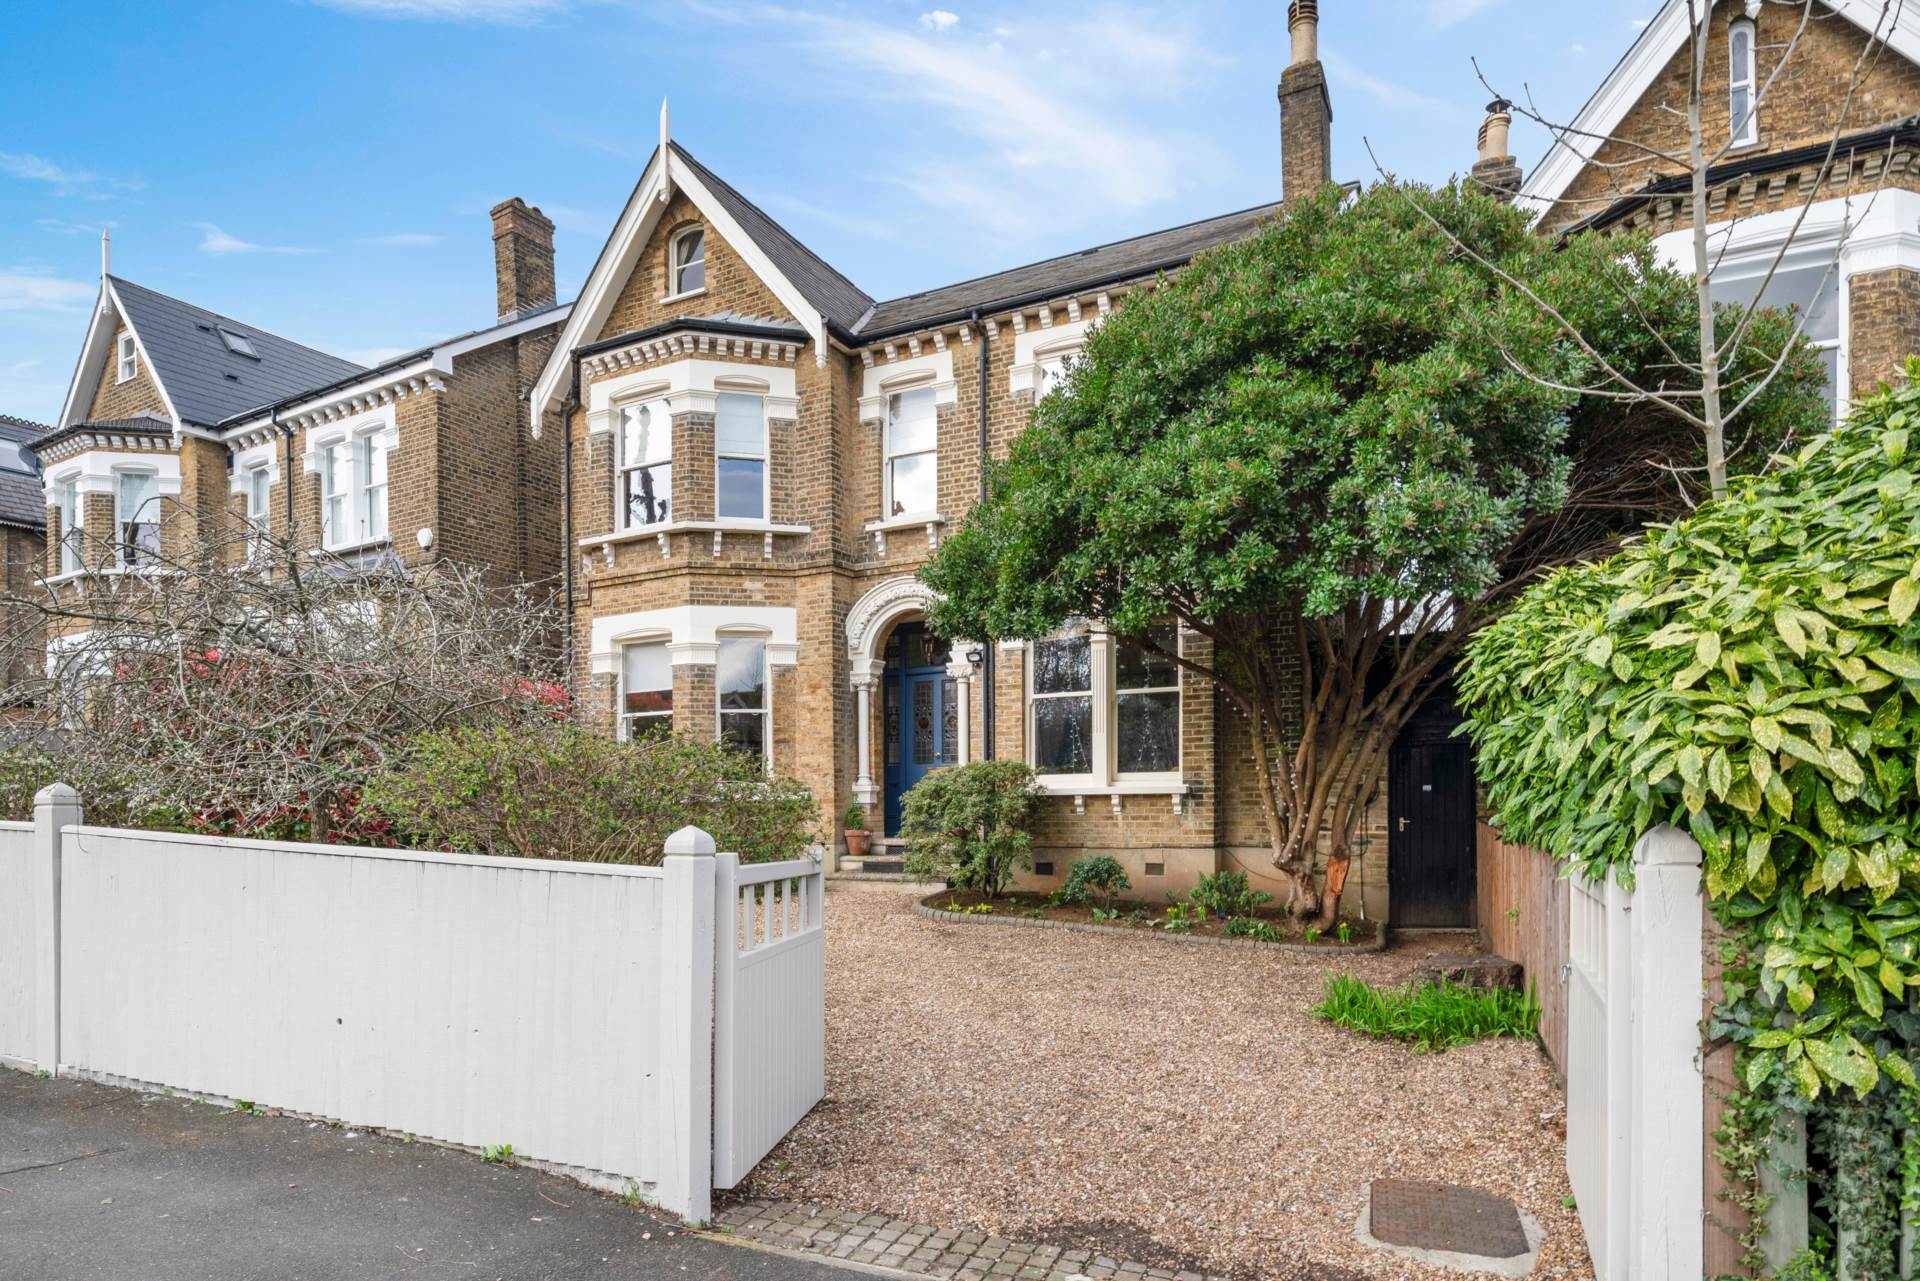 Palace Road,Tulse Hill, SW2 3LB, Image 1